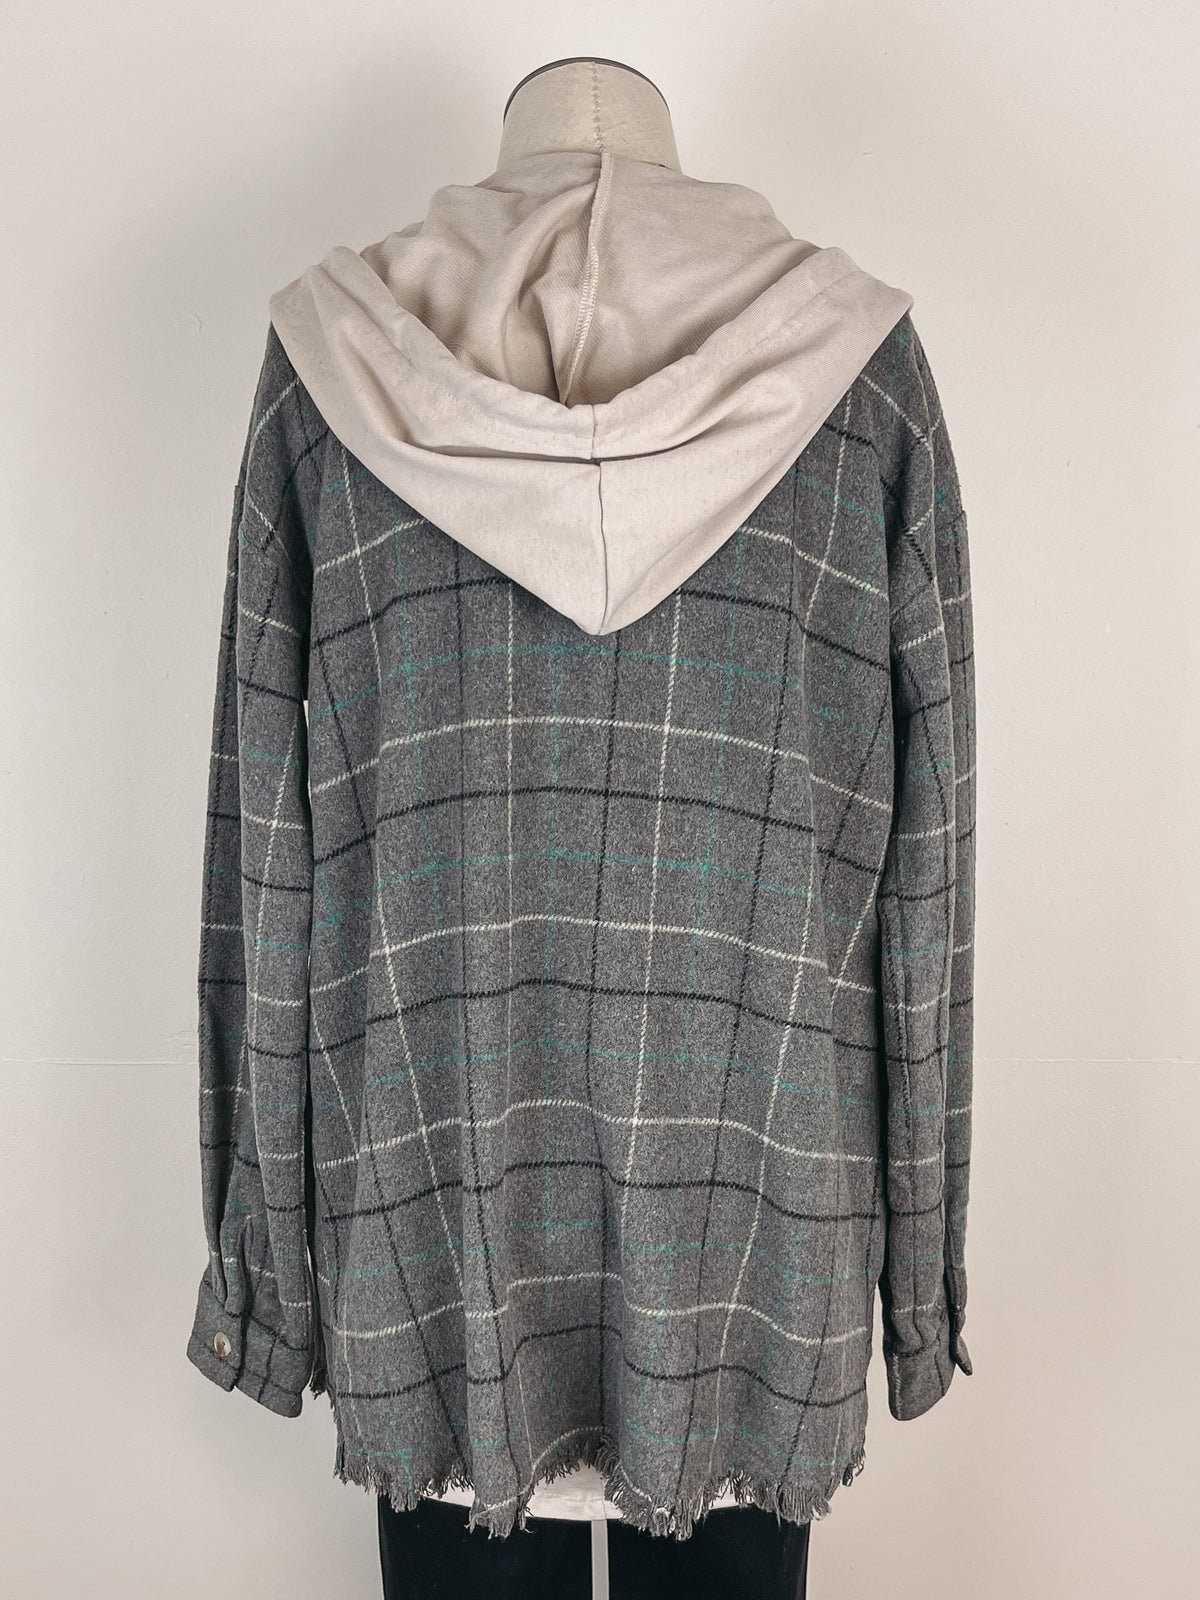 Grid Pattern Hooded Shacket in Charcoal